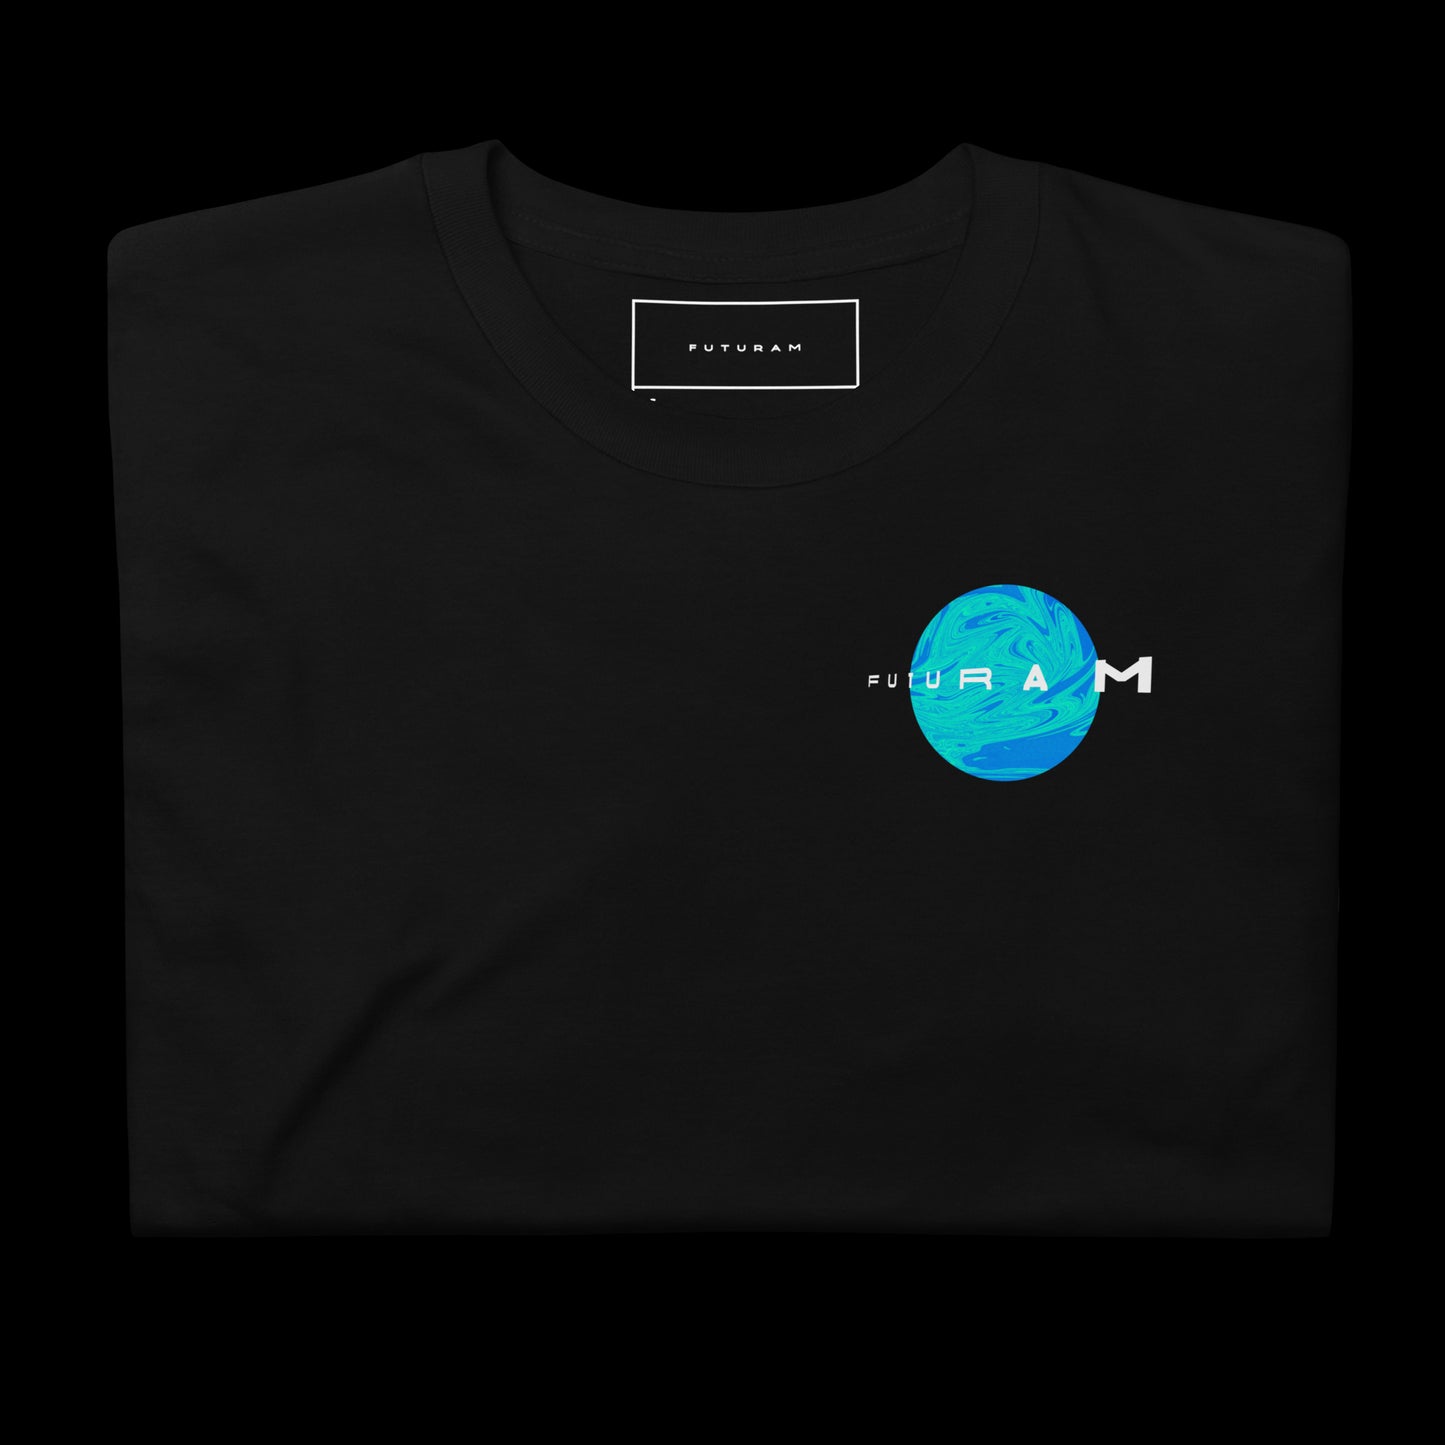 A Planet From Outer Space Tee - Universal T-Shirt